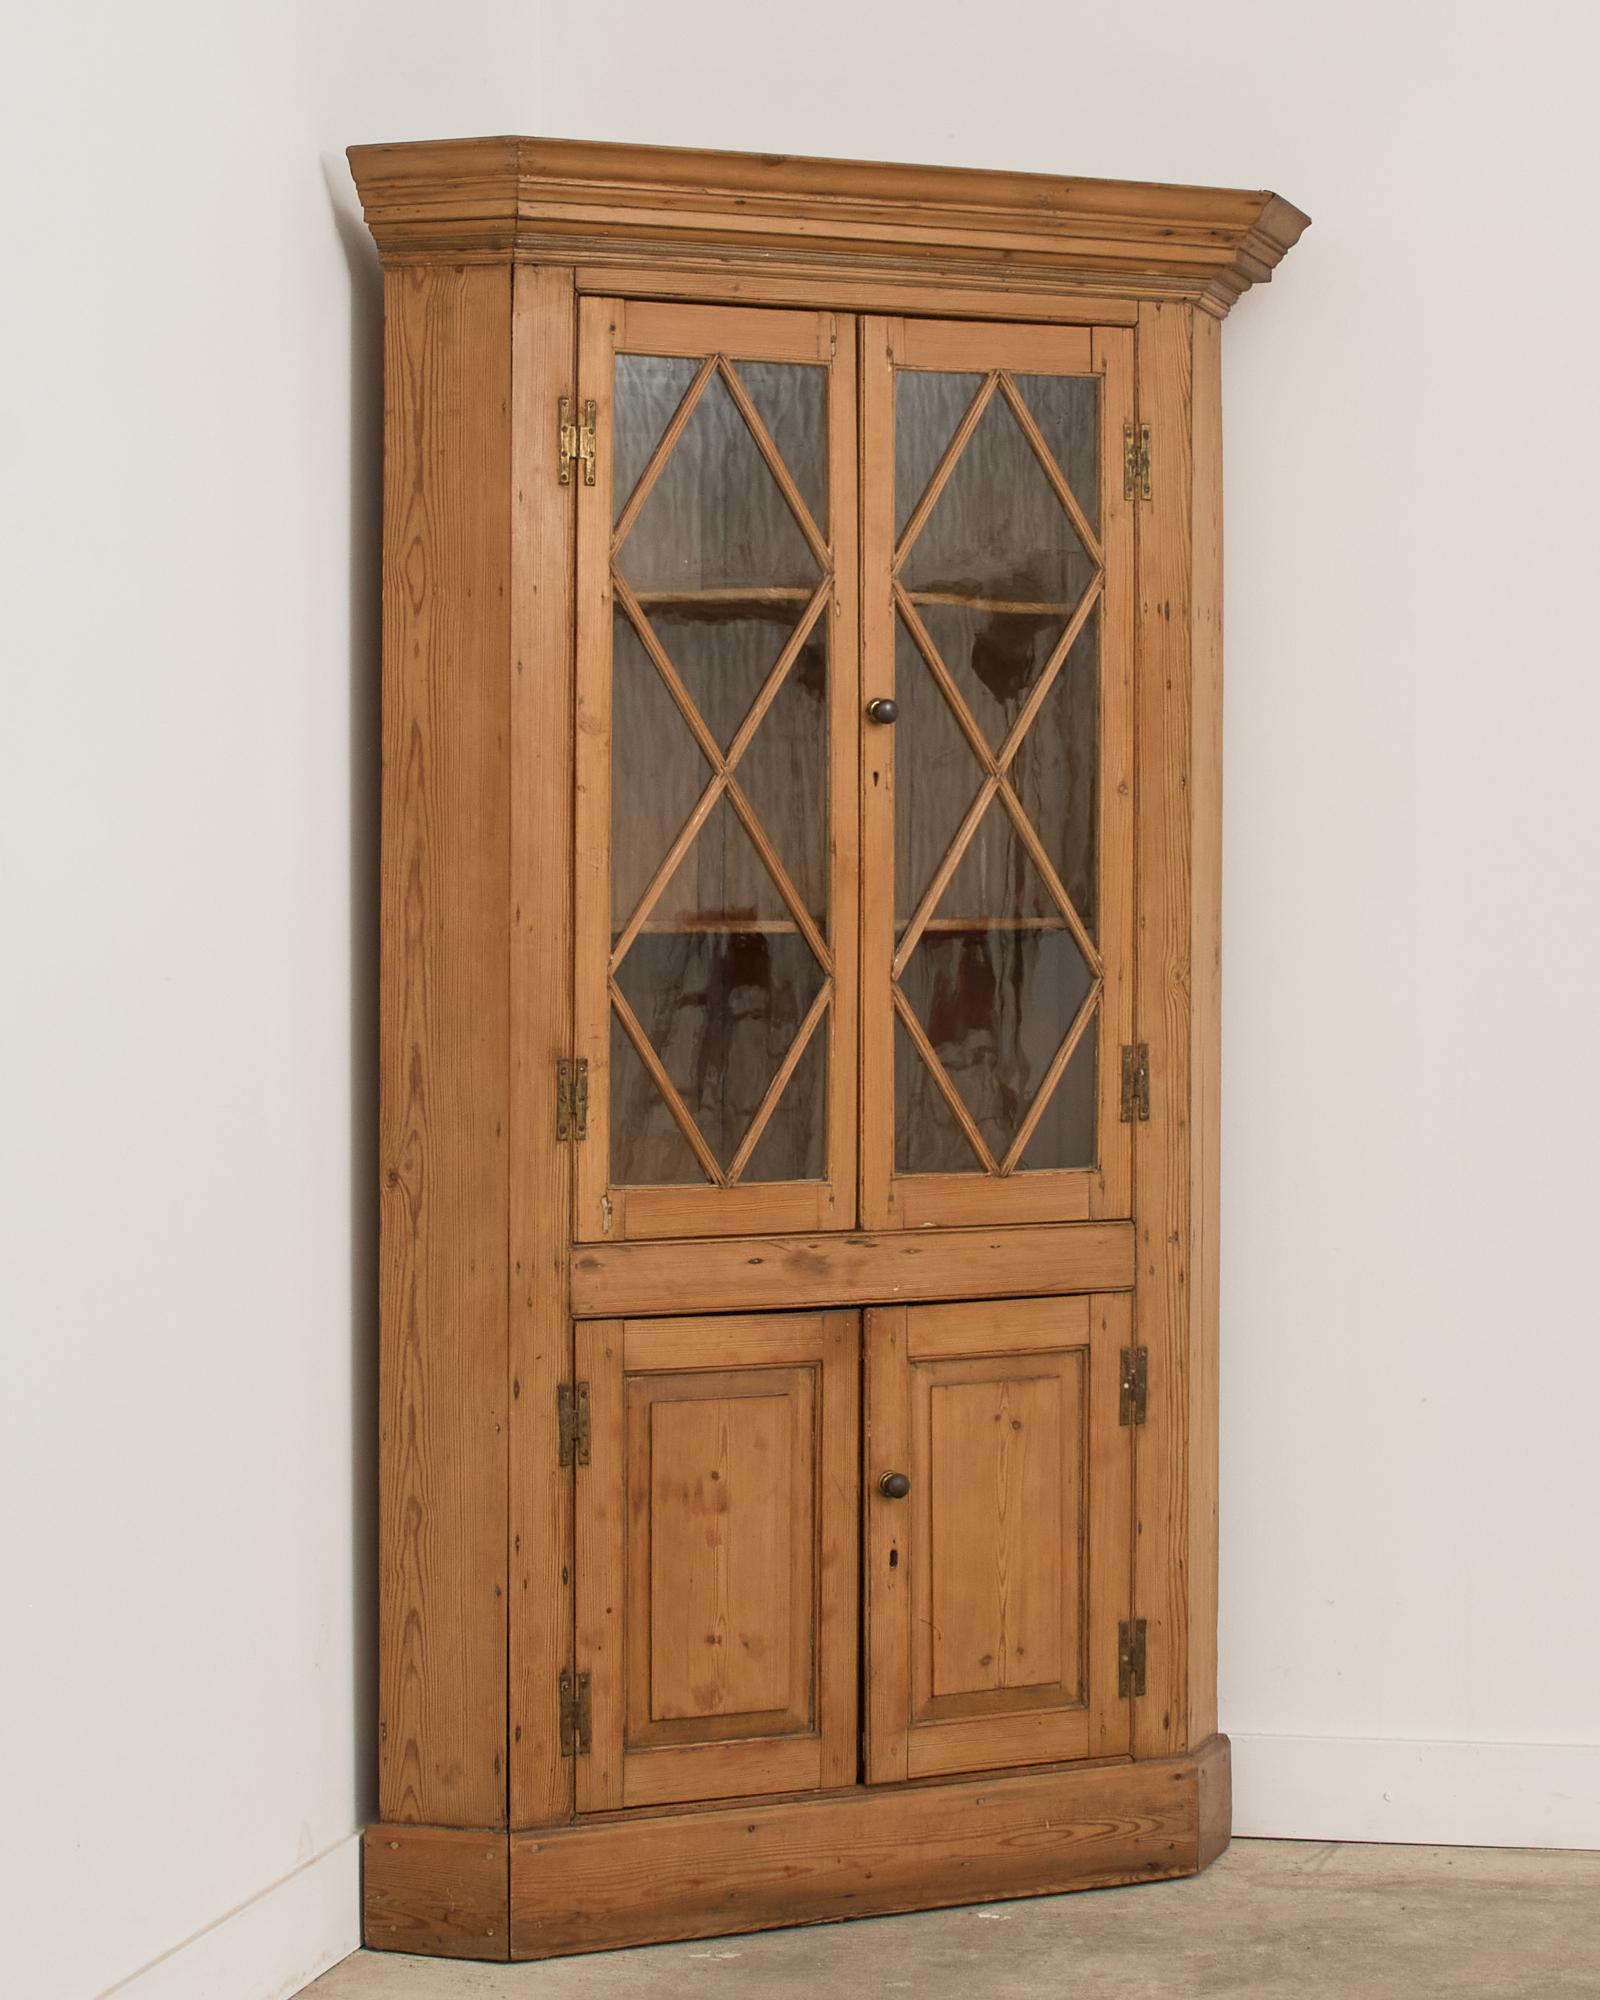 19th century gorgeous country English provincial cupboard corner cabinet or bookcase crafted from pine. The cabinet features a pair of glazed doors above a pair of paneled doors. The top has a cornice molding that angles back on the ends. The pine